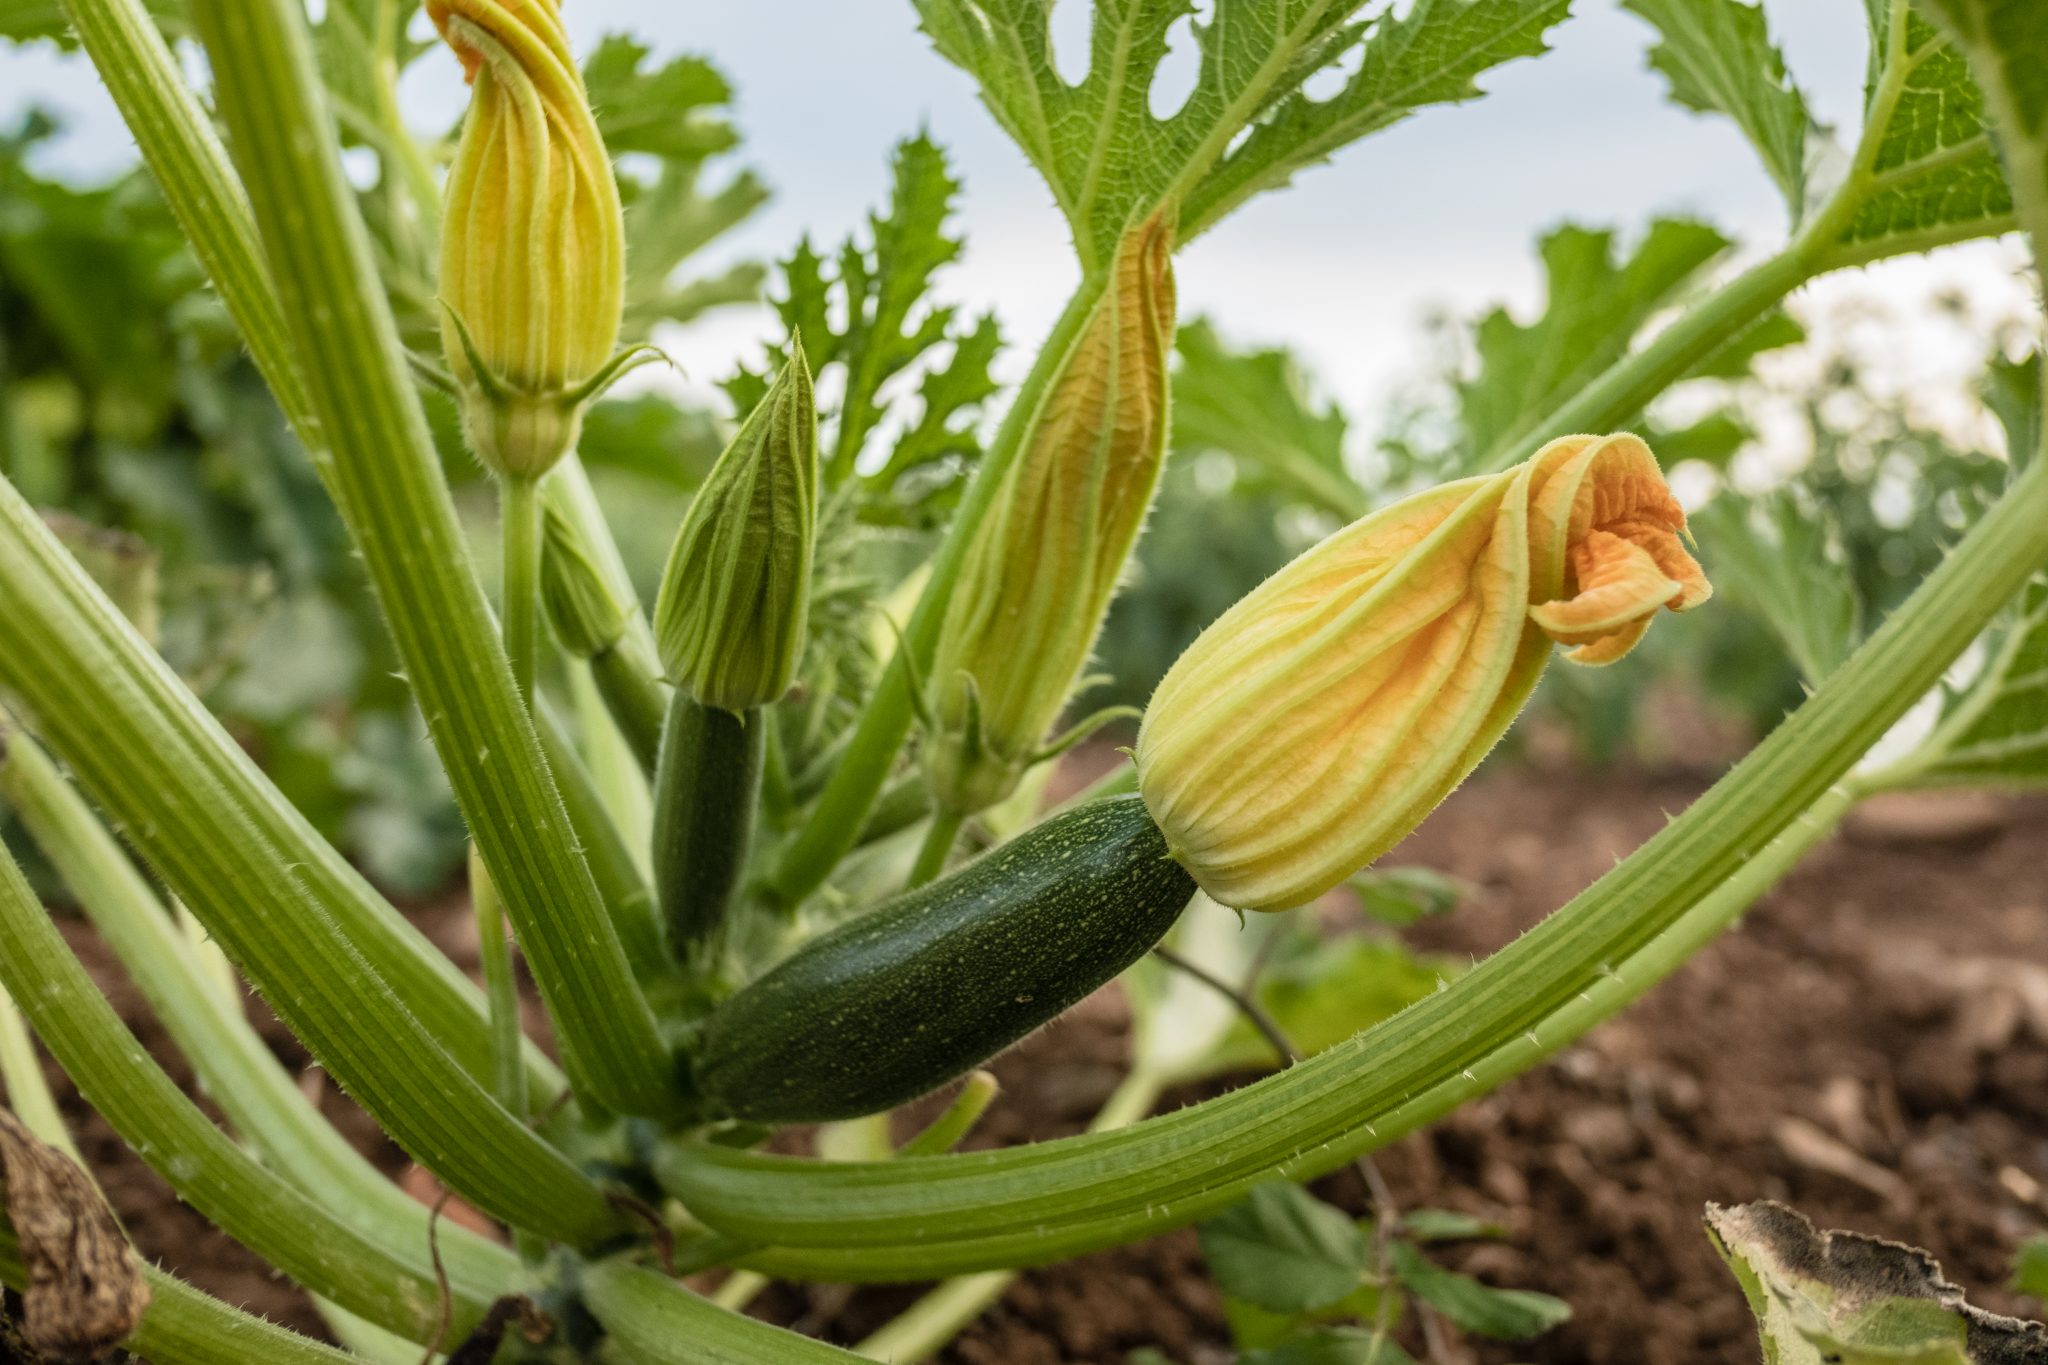 Squash blooms and fruit